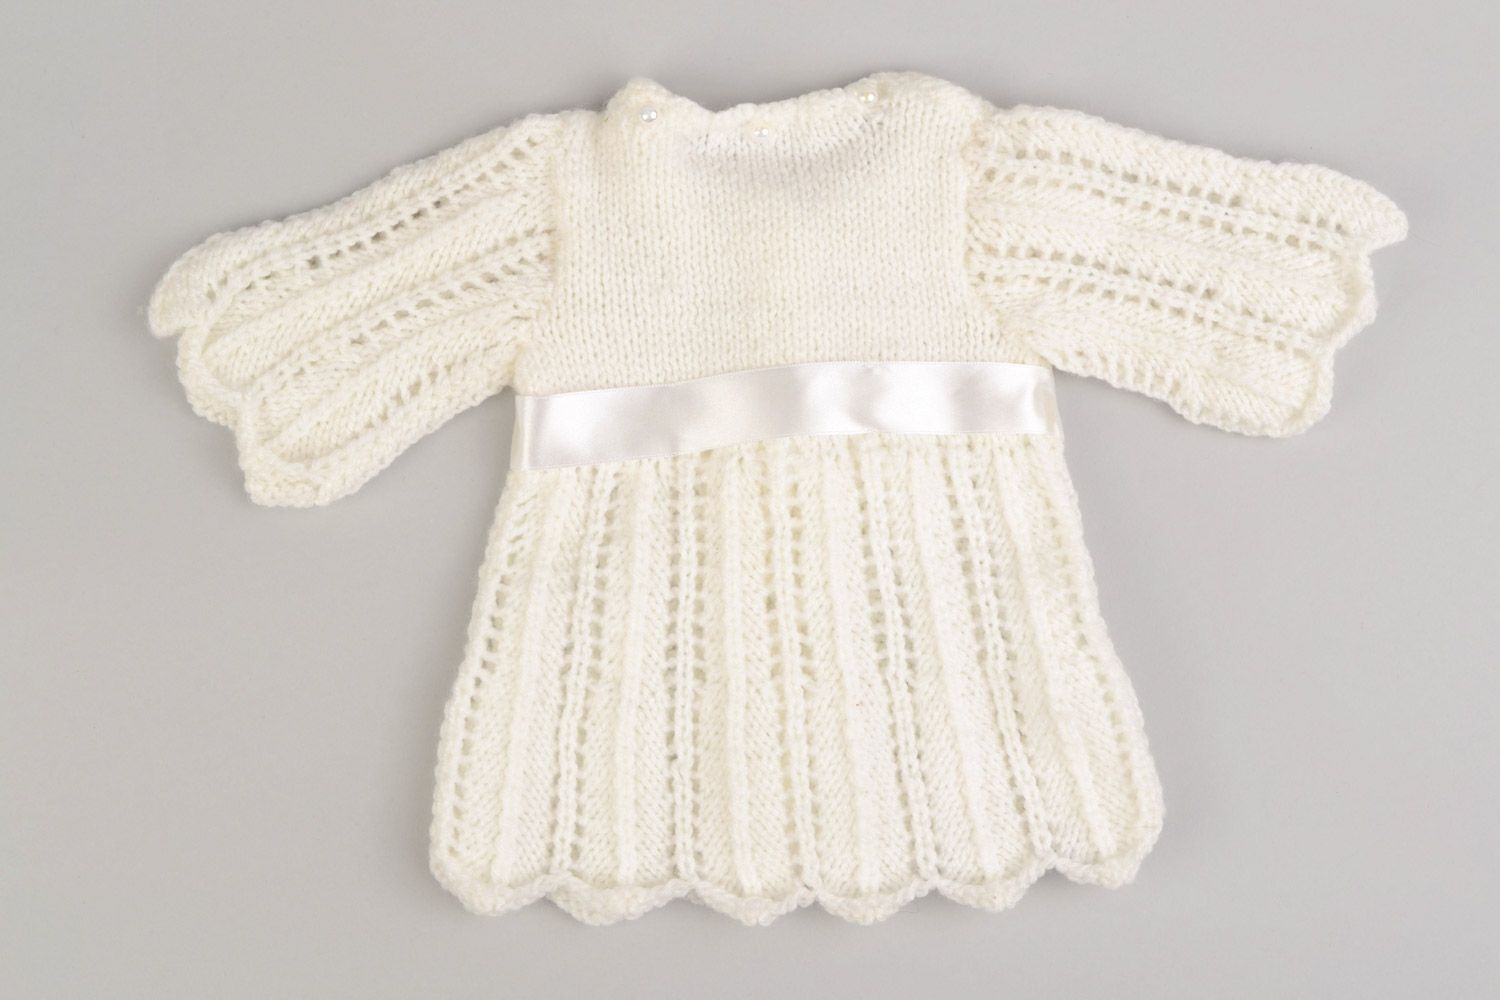 Knitted handmade white baby dress made of acrylic yarns with long sleeves  photo 4